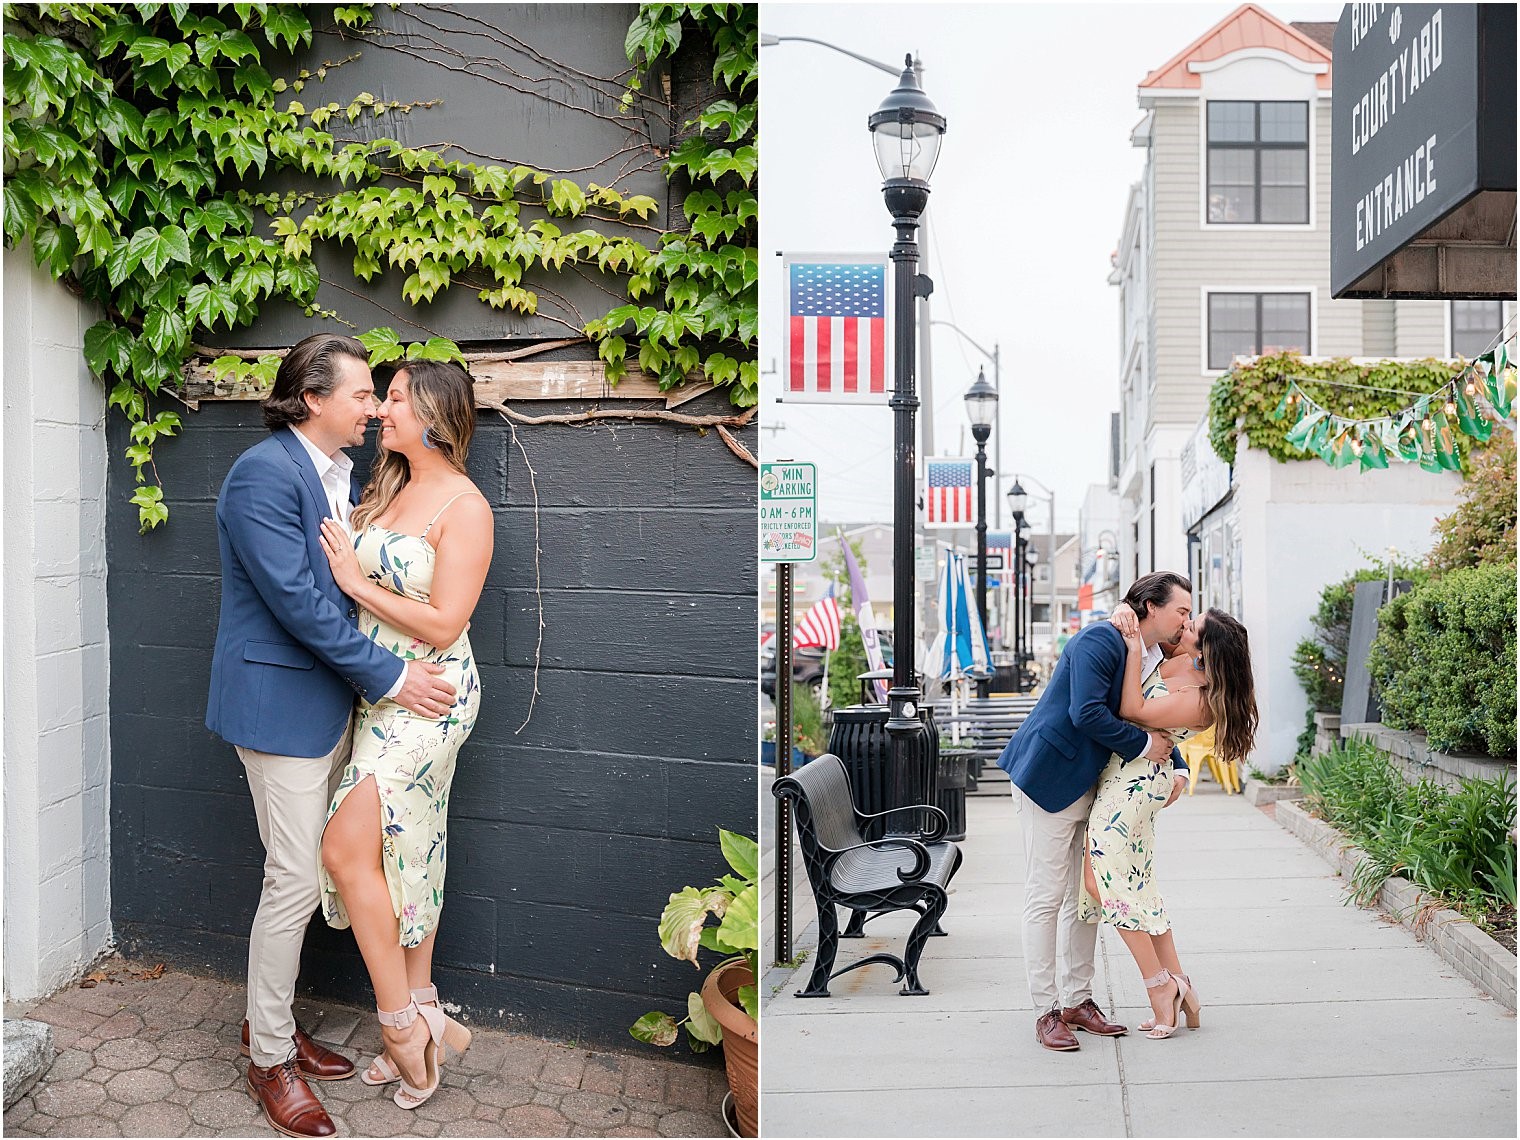 Woman and Man enjoying their engagement session in New Jersey